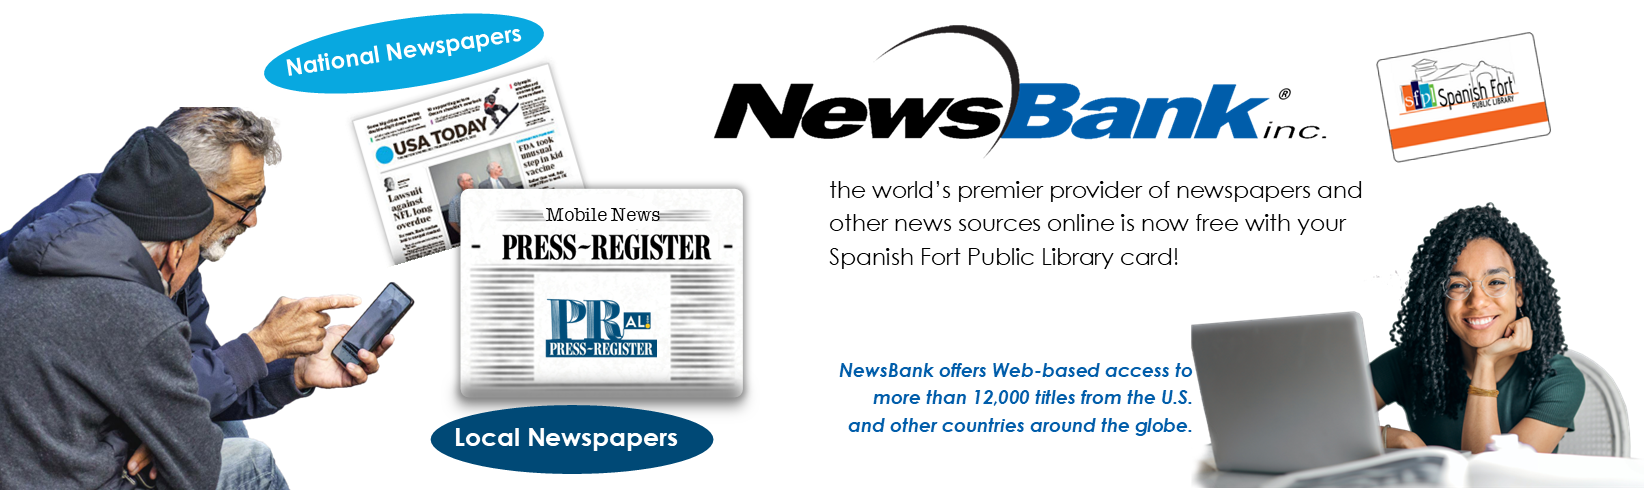 Access thousands of news resources, including your local Mobile Press-Register, from across the USA and around the world FREE with your Spanish Fort Public Library card and NewsBank!